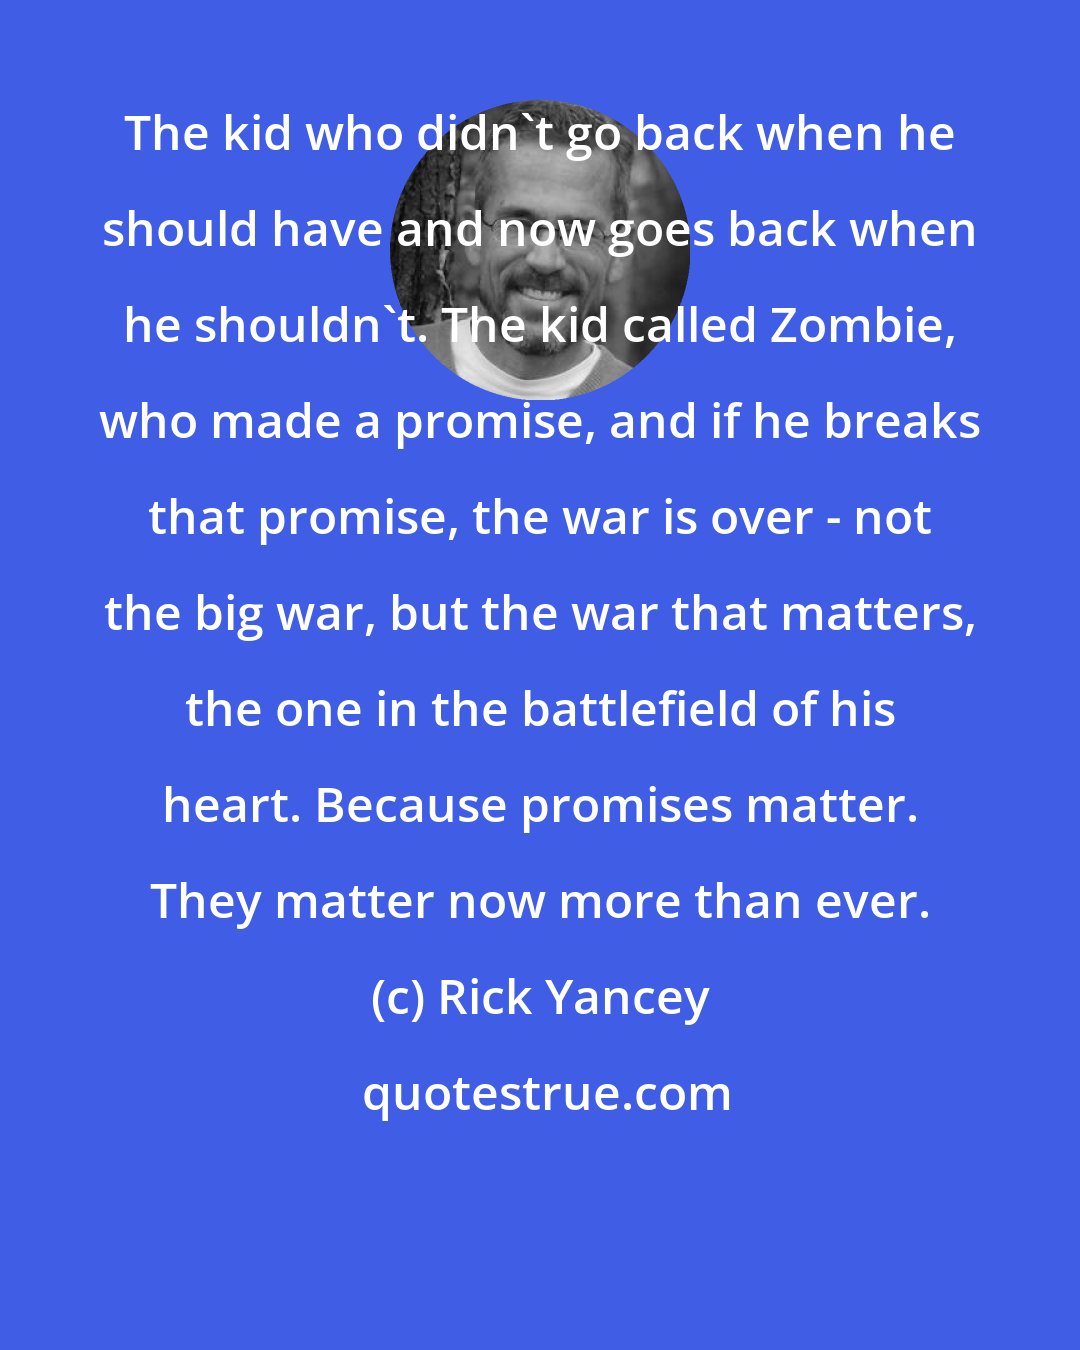 Rick Yancey: The kid who didn't go back when he should have and now goes back when he shouldn't. The kid called Zombie, who made a promise, and if he breaks that promise, the war is over - not the big war, but the war that matters, the one in the battlefield of his heart. Because promises matter. They matter now more than ever.